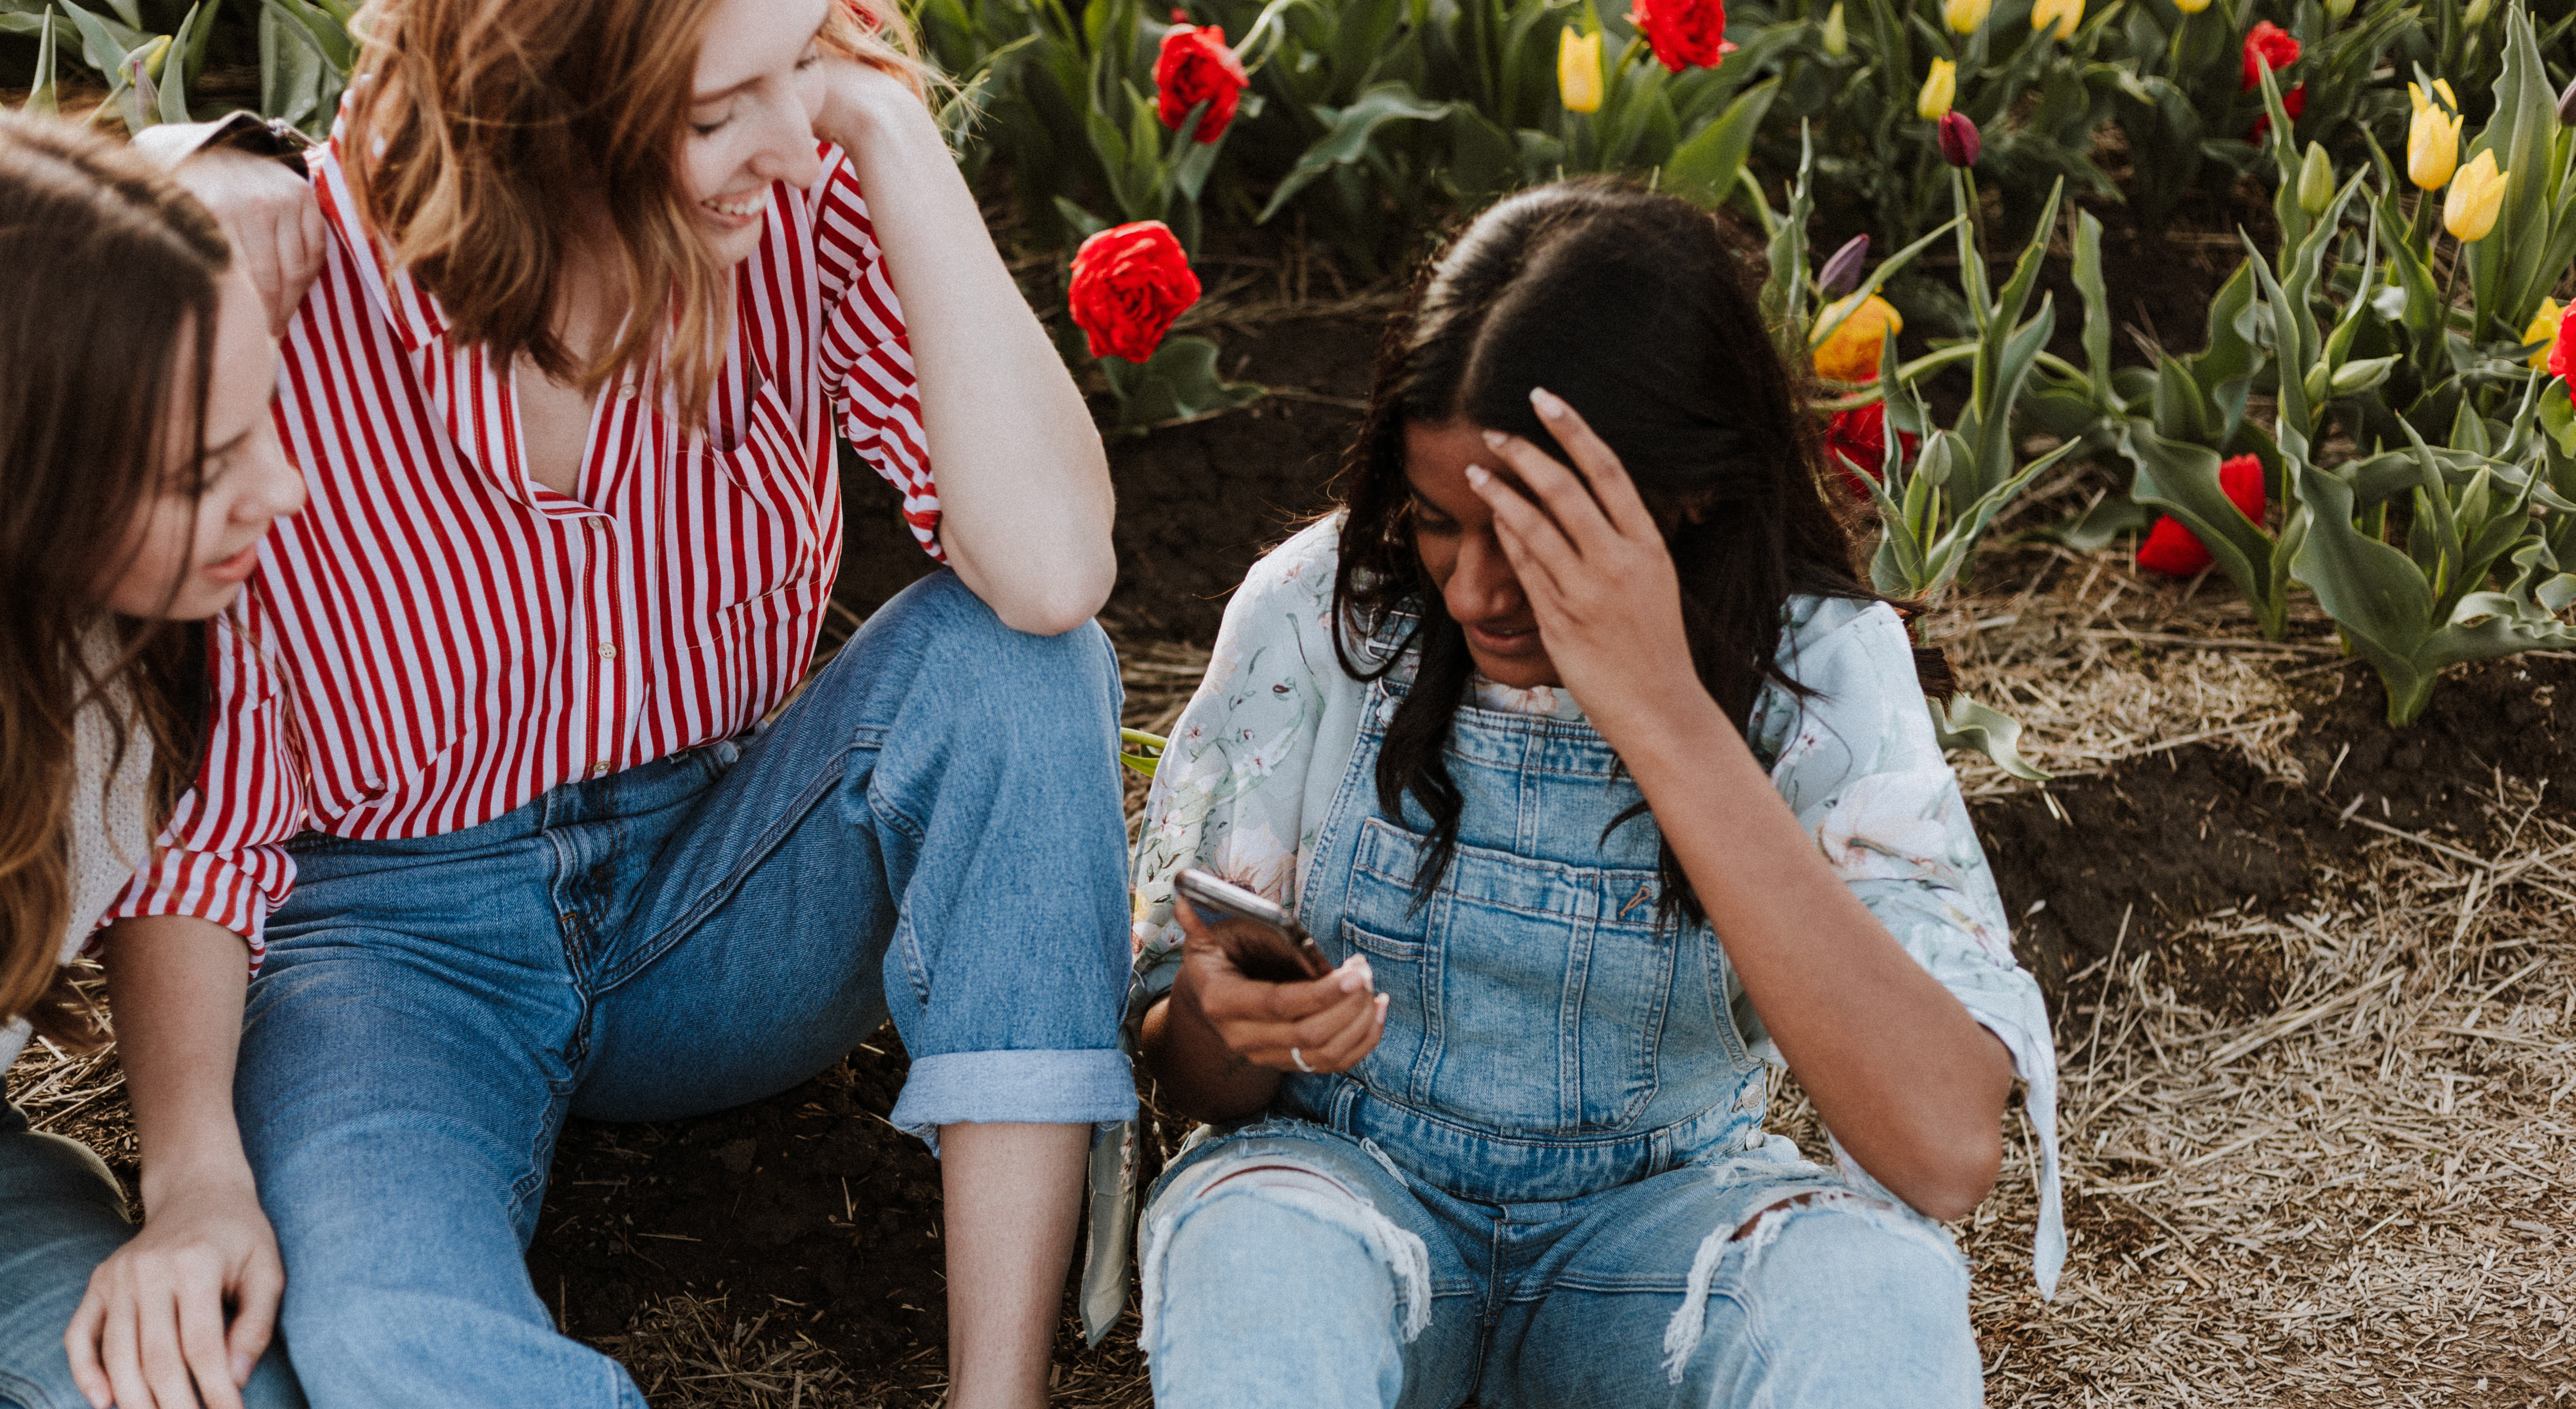 Understanding How Technology Offers Social Connection for Your Child – What’s a Healthy Balance?